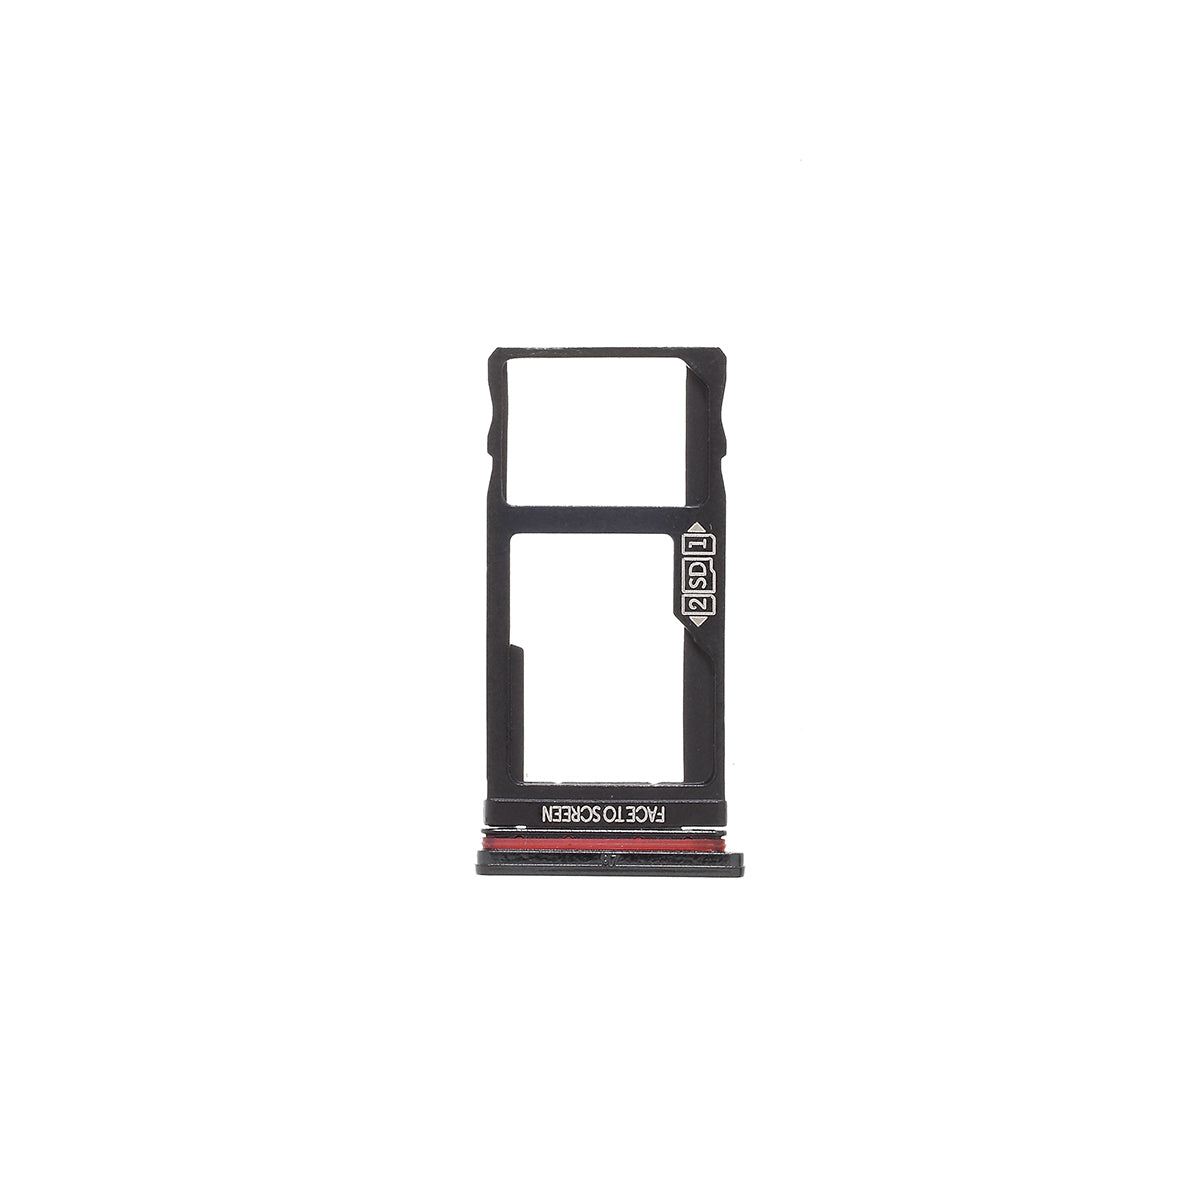 OEM Micro SD Card Tray Holder Replacement for Motorola One Vision P50 - Red / Black